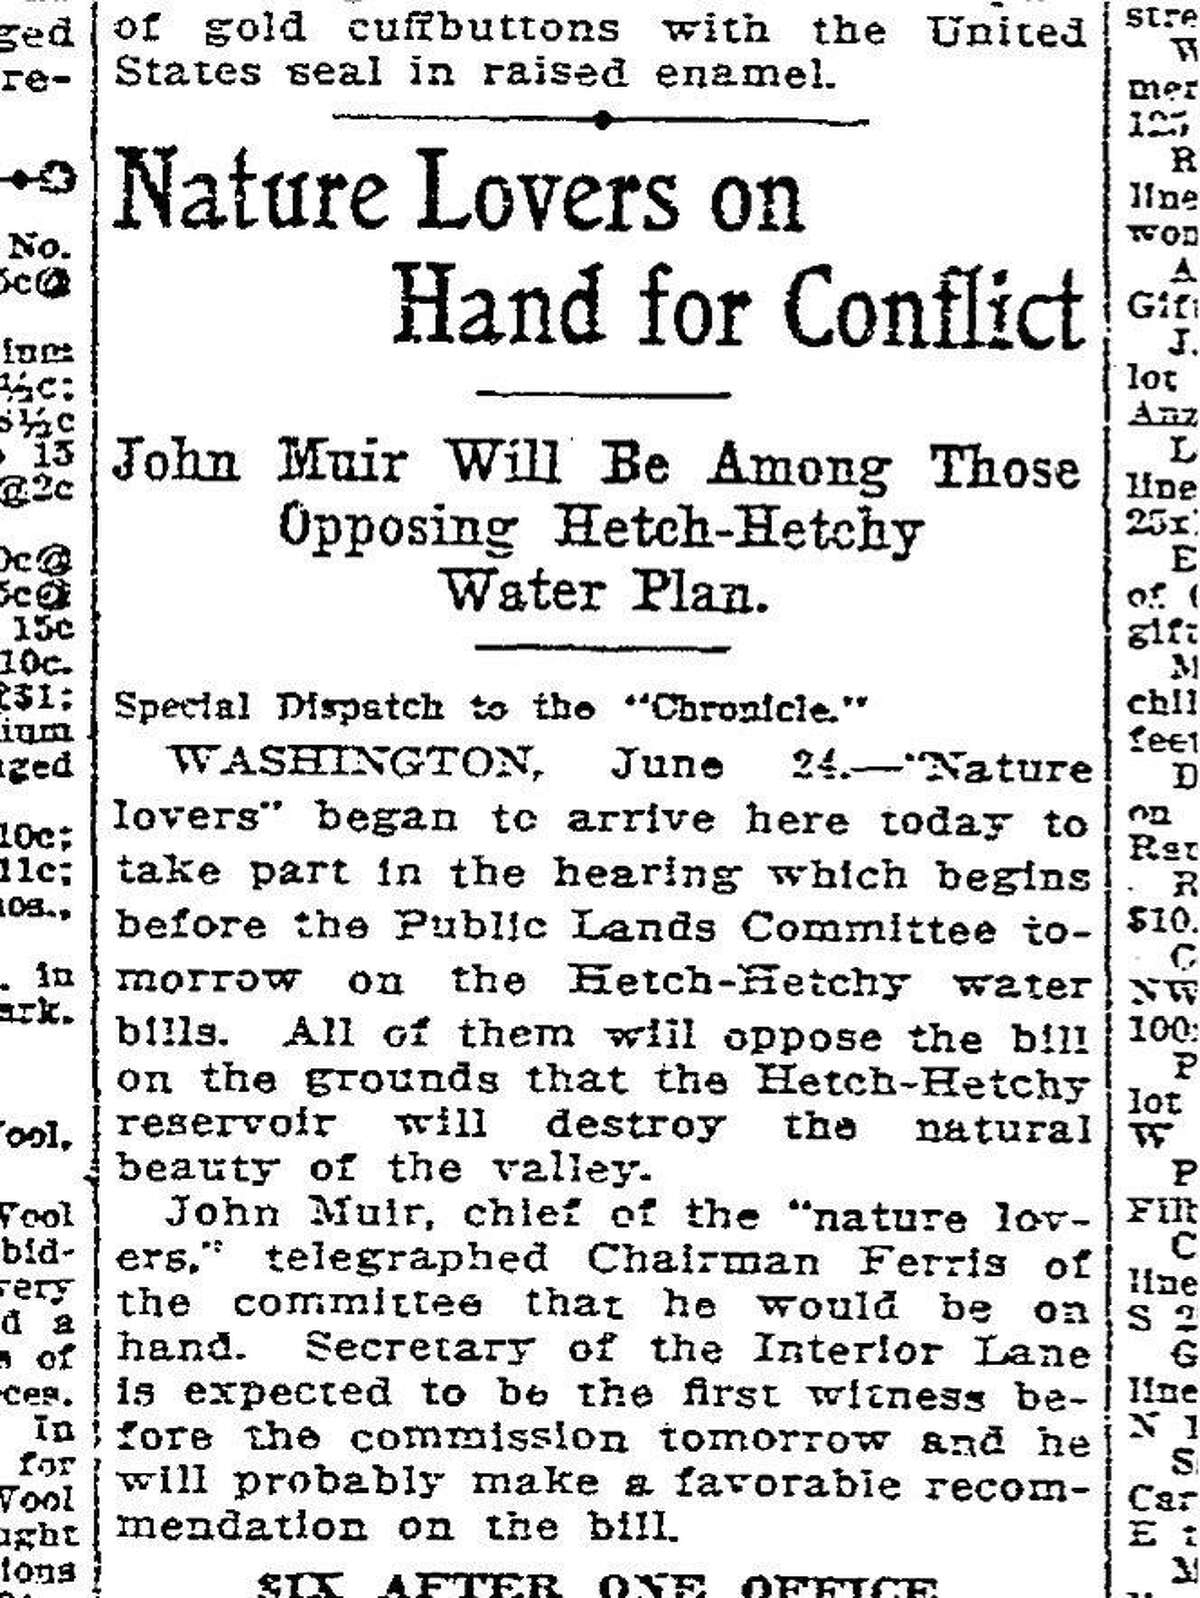 June 25,, 1913 article on the John Muir and the Sierra Club fighting to prevent the creation of Hetch Hetchy Reservoir on National Park land